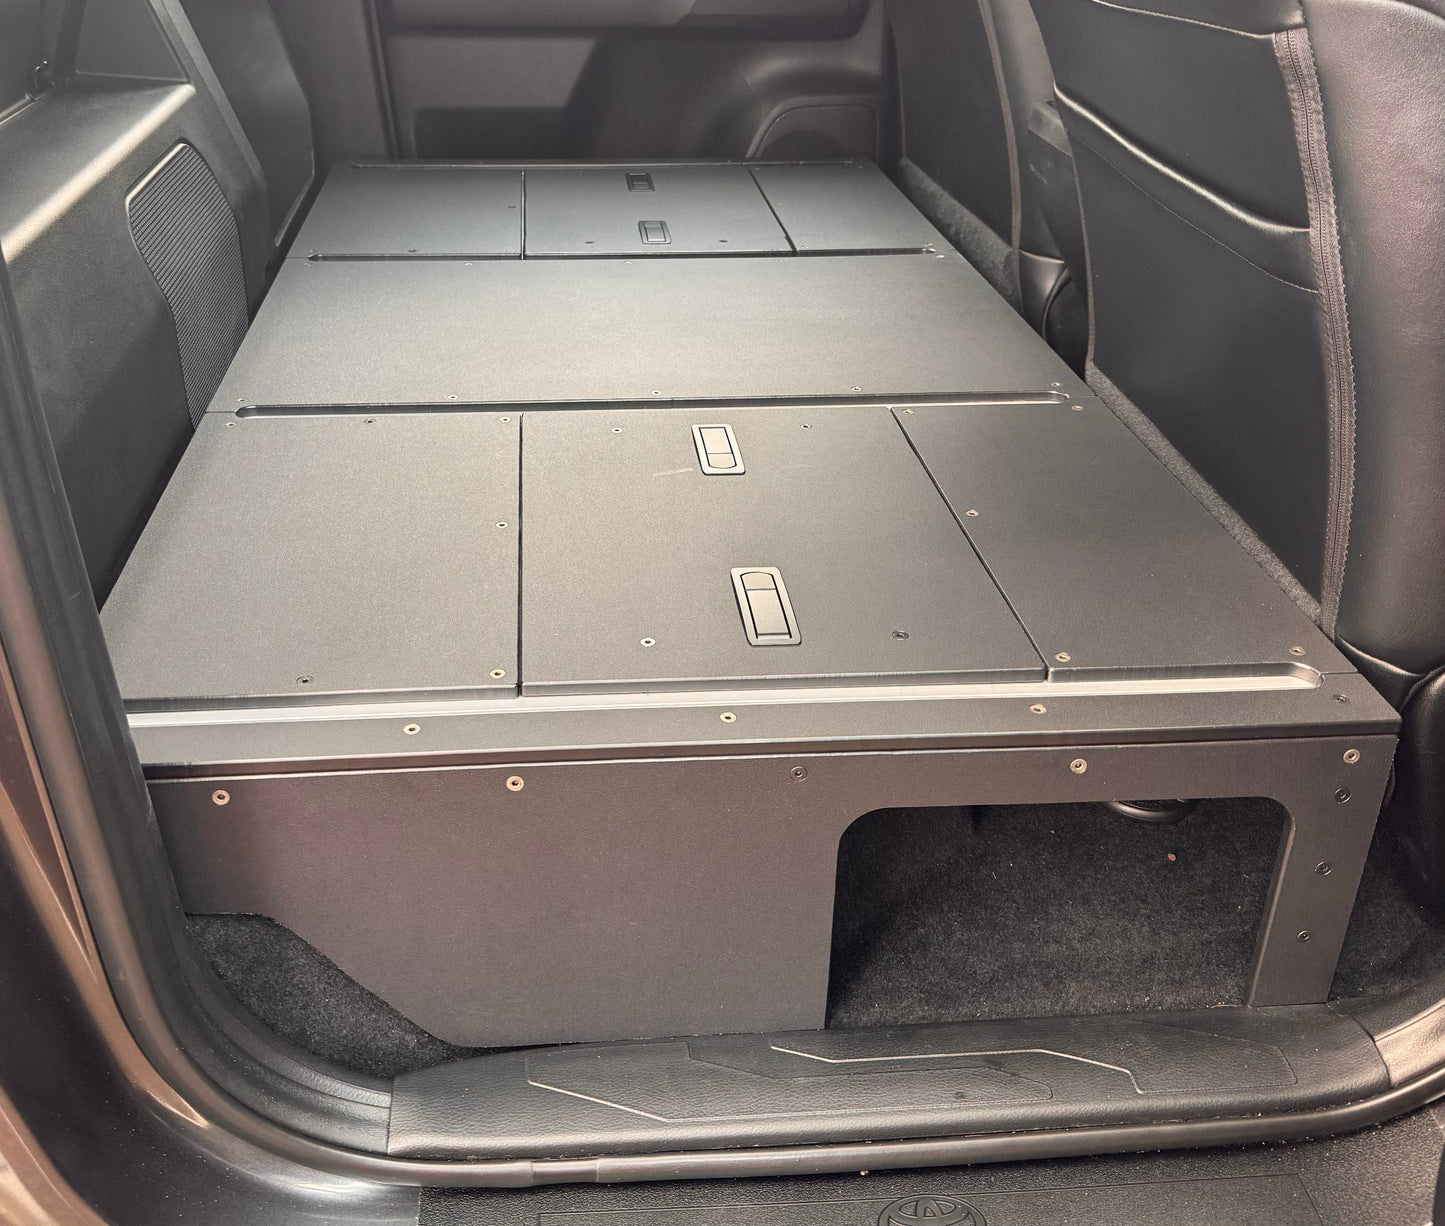 Toyota Tacoma Full Rear Seat Delete Kit, converting the rear seats into a flat cargo deck.